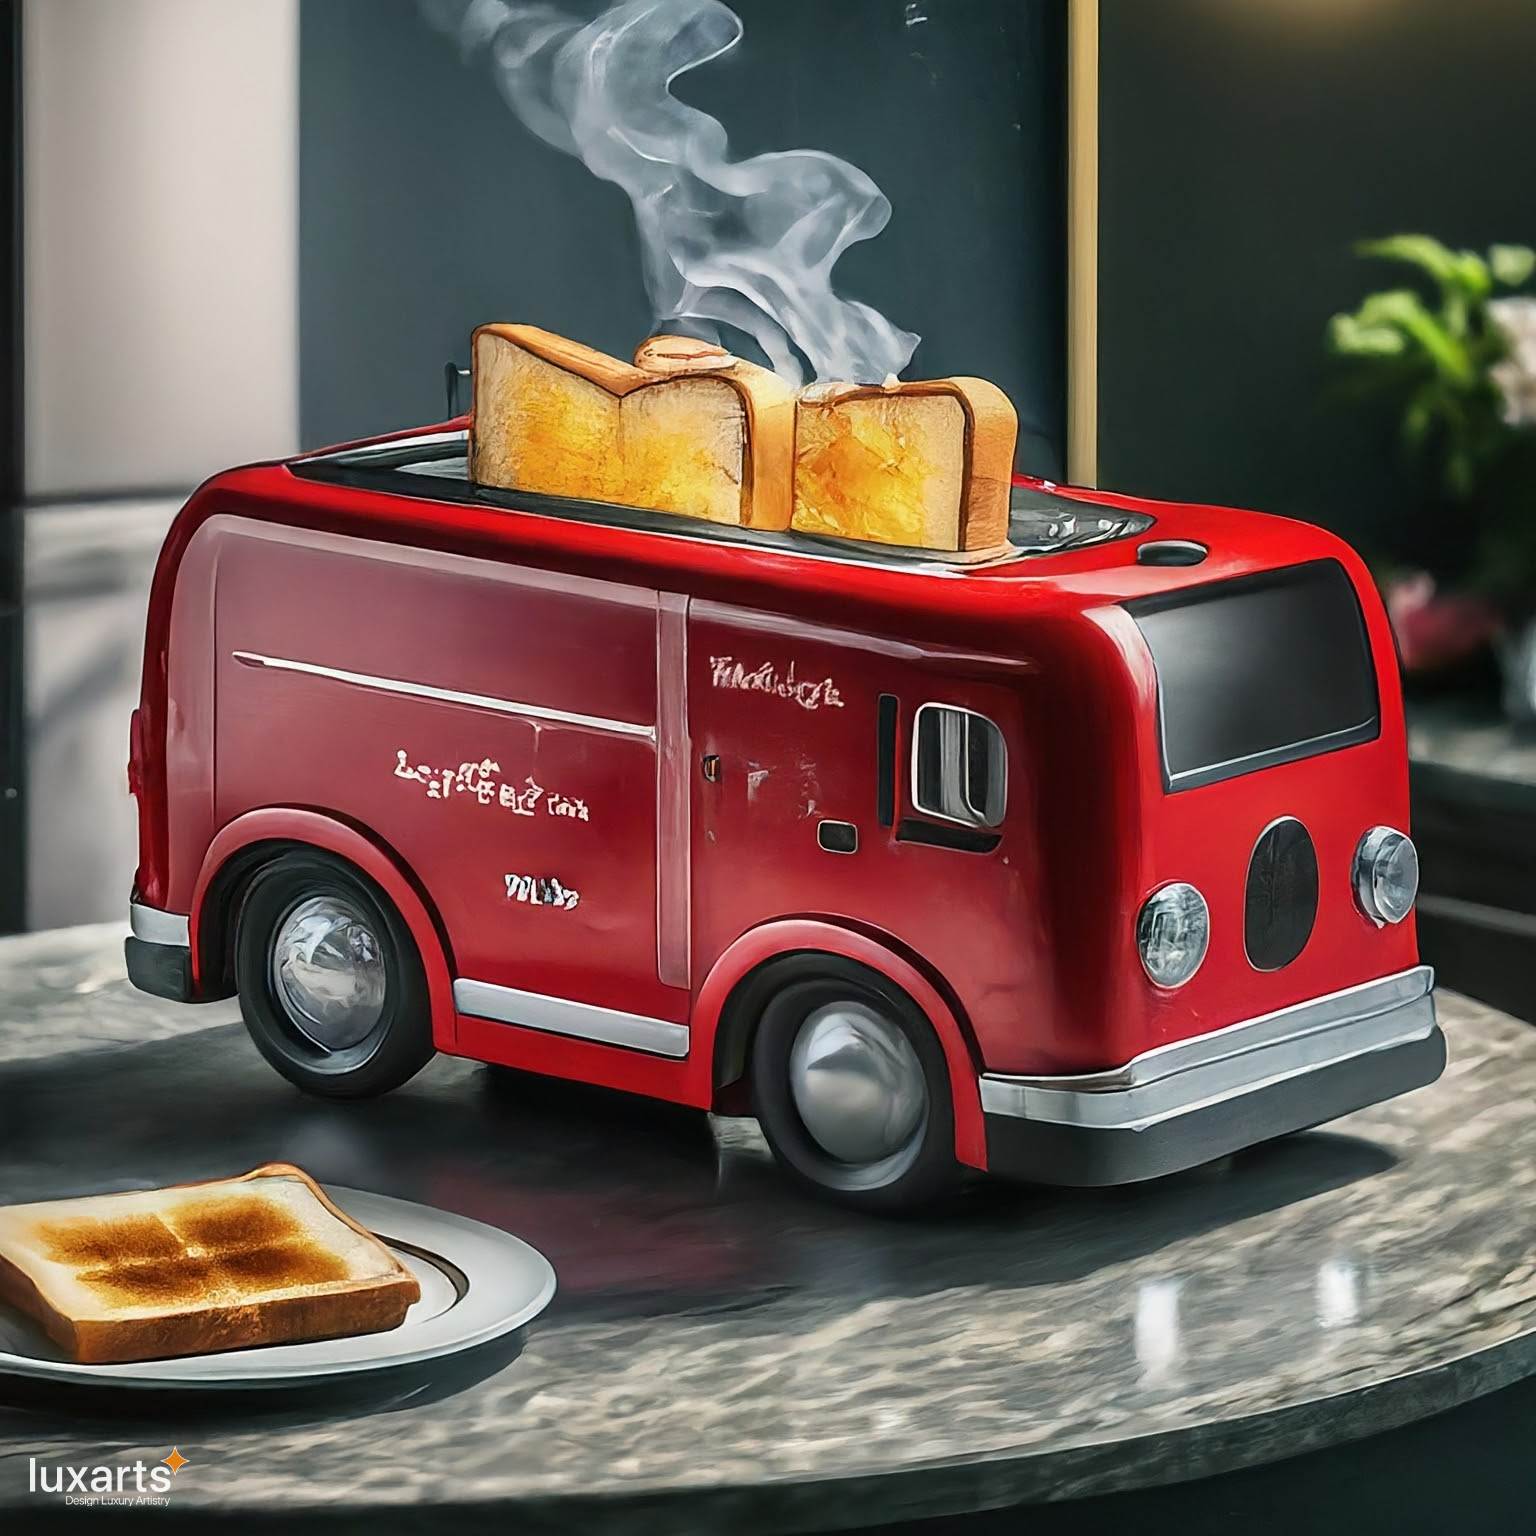 Fire Truck Shaped Toaster: Adding Fun to Your Kitchen luxarts fire truck toaster 1